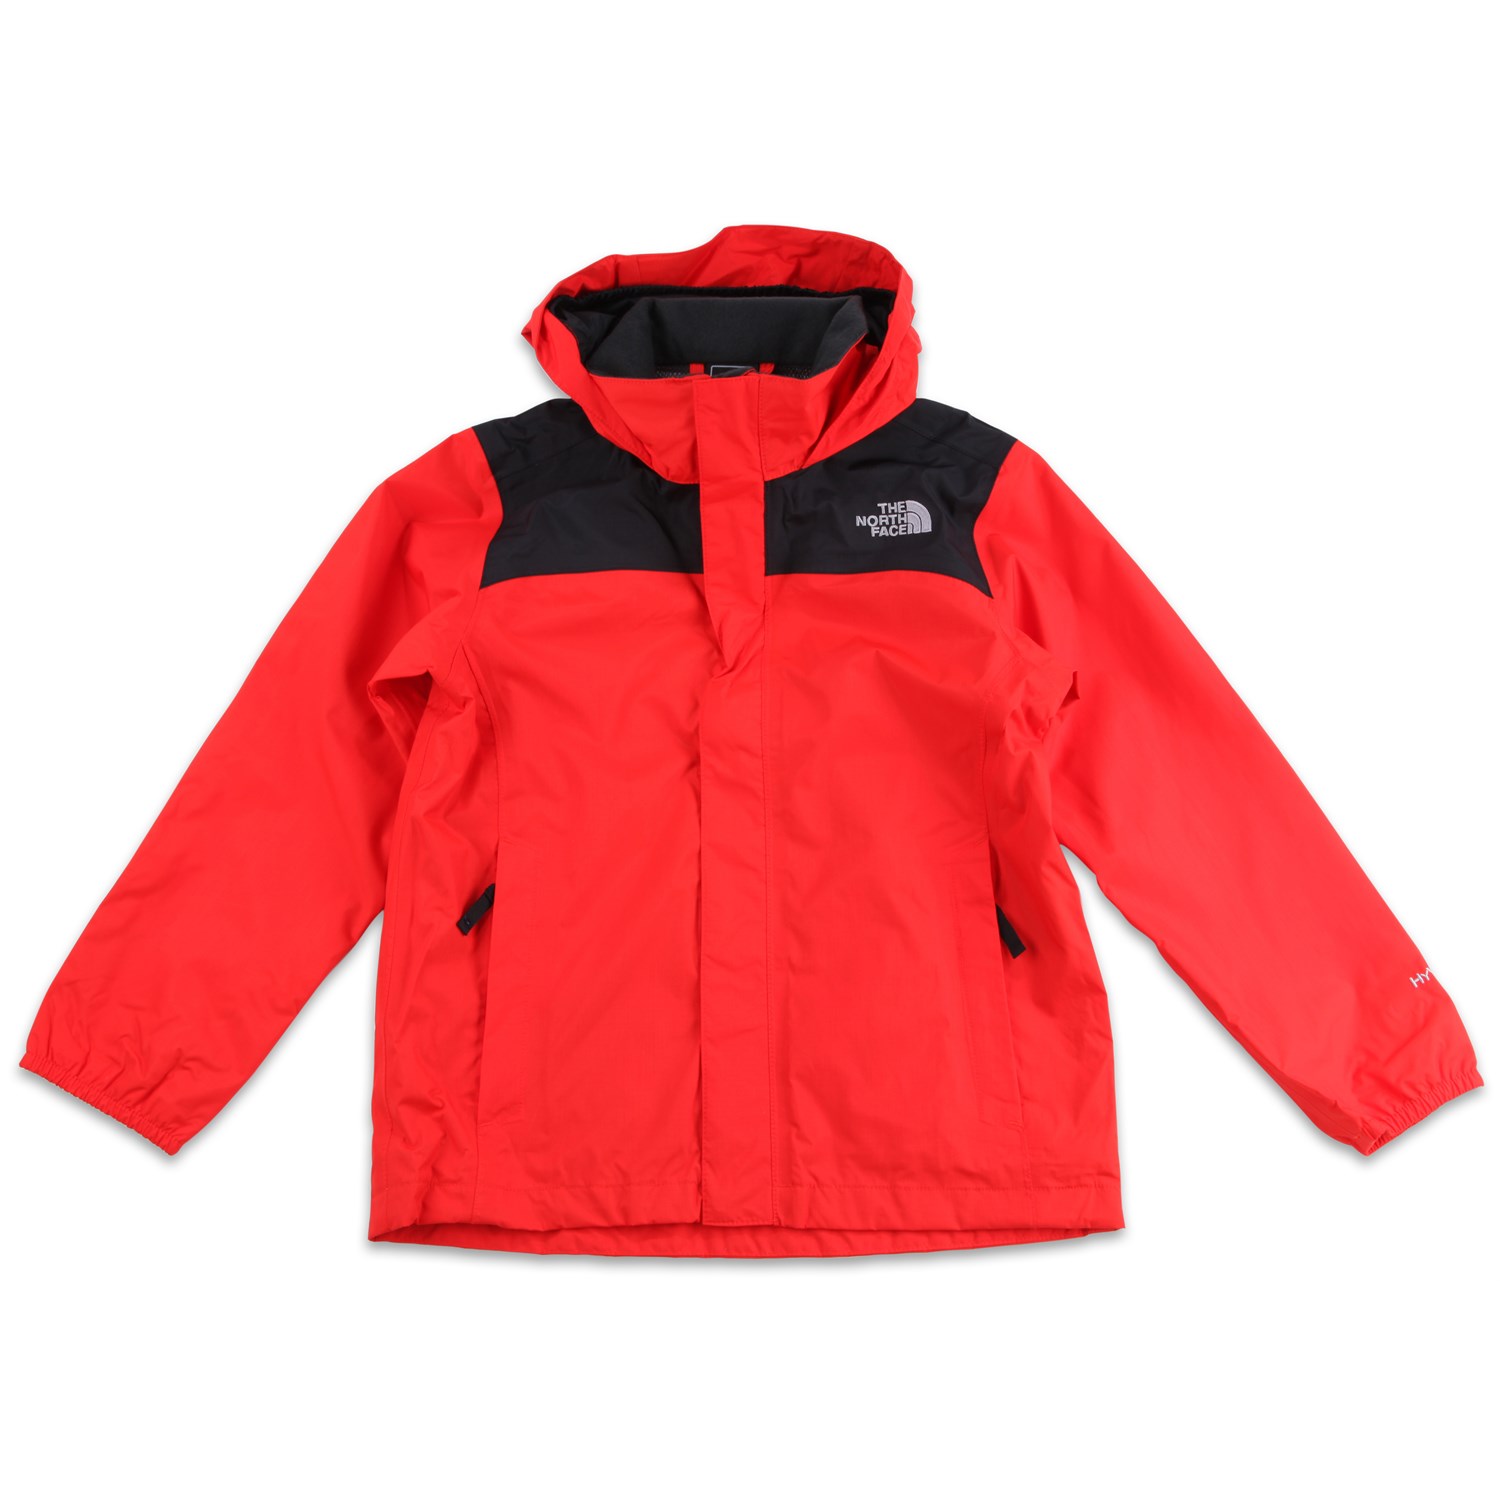 The North Face Resolve Reflective Jacket - Boys